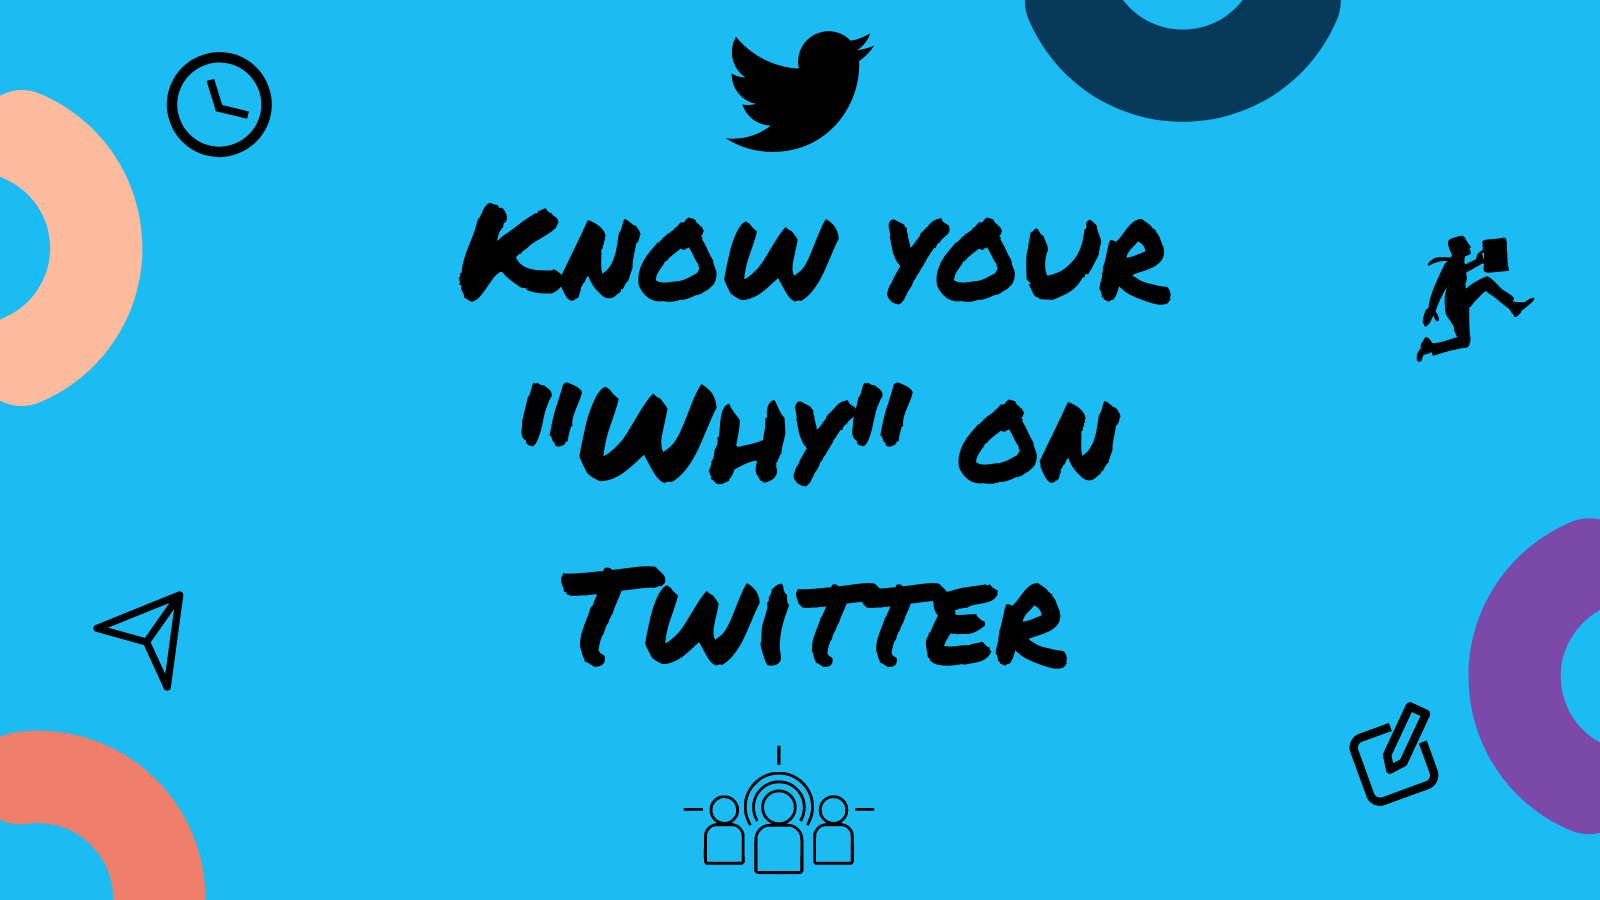 Know your “Why” on Twitter